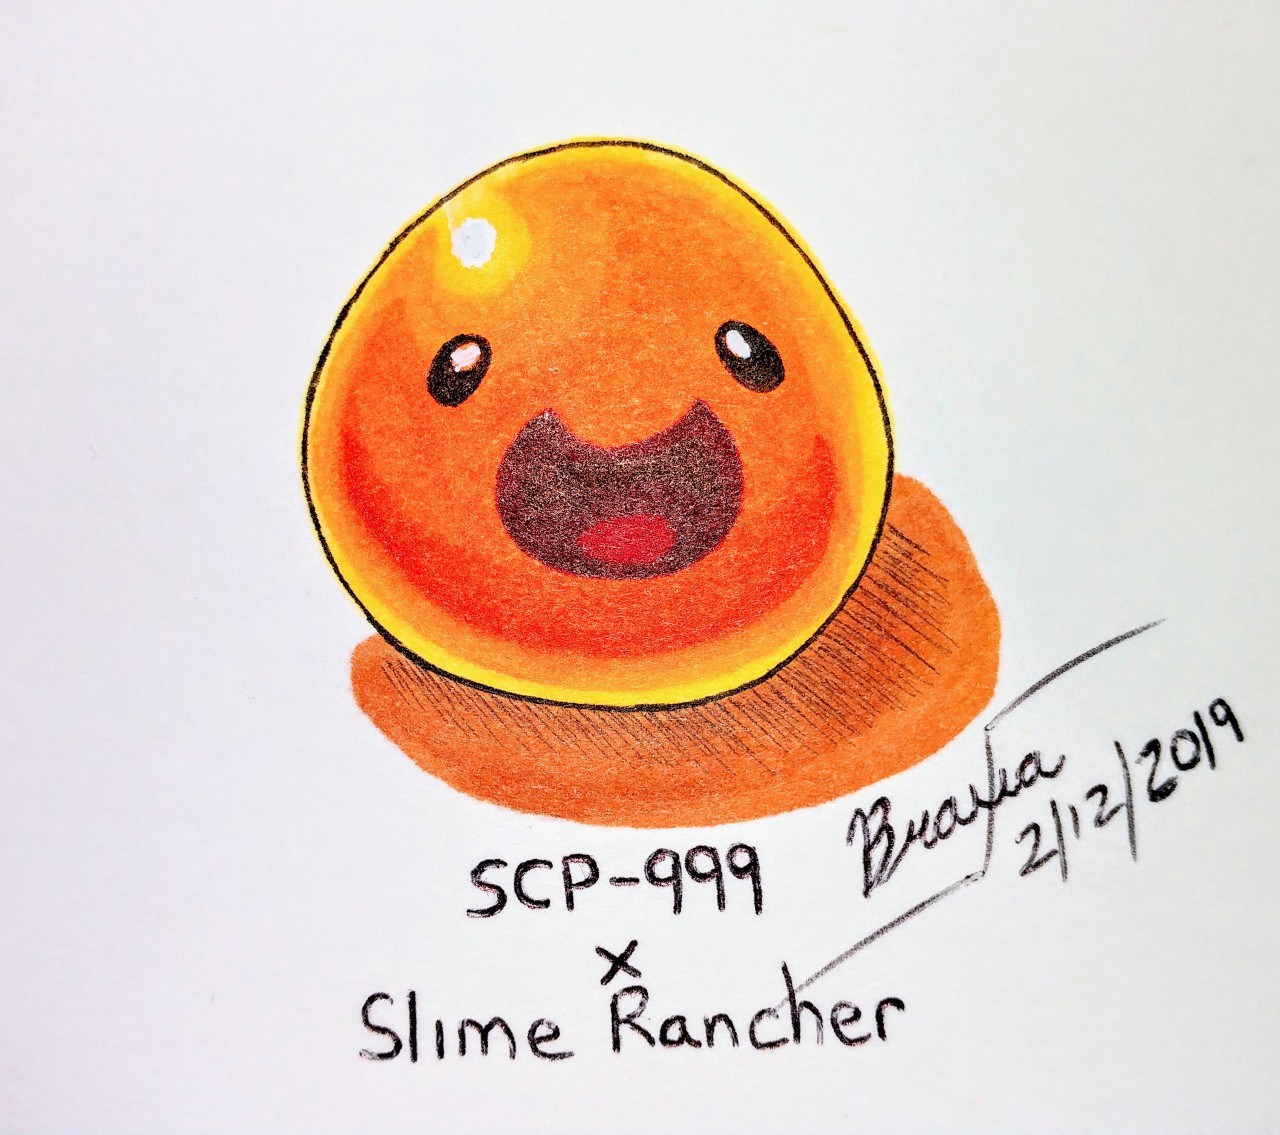 SCP 999: The Tickle Monster, SCP 999: The Tickle Slime